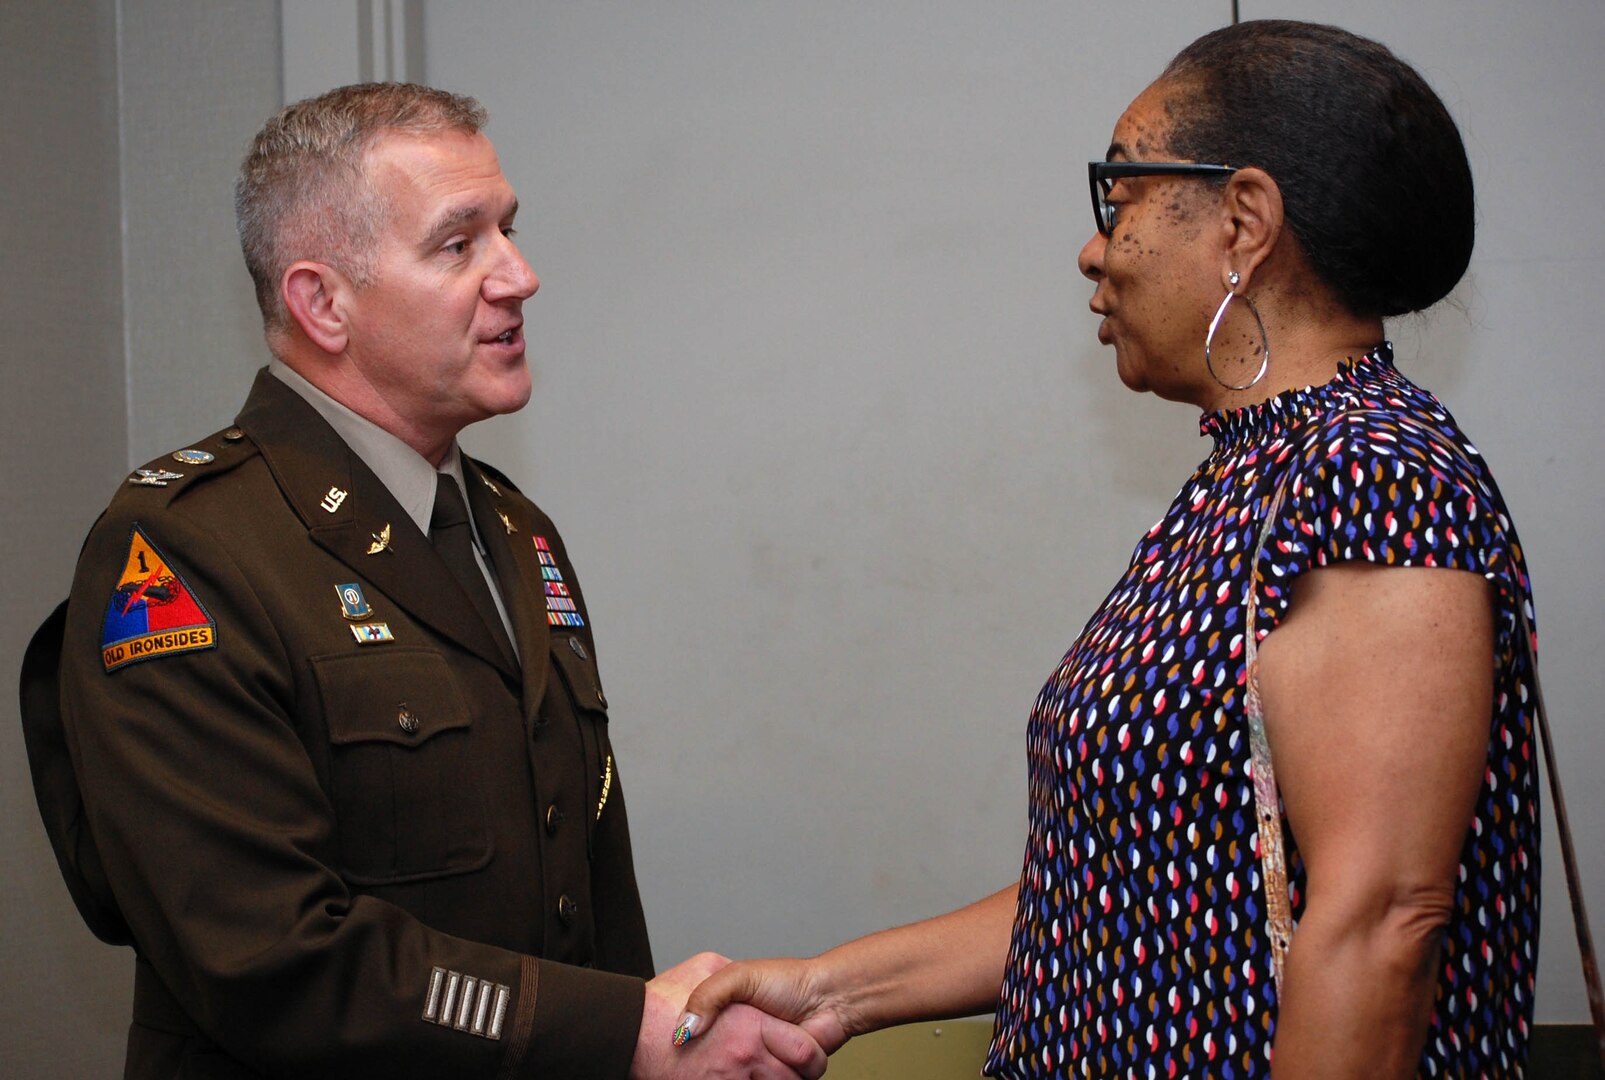 A man in his Army uniform shakes the hand of a woman wearing a multi-colored blouse